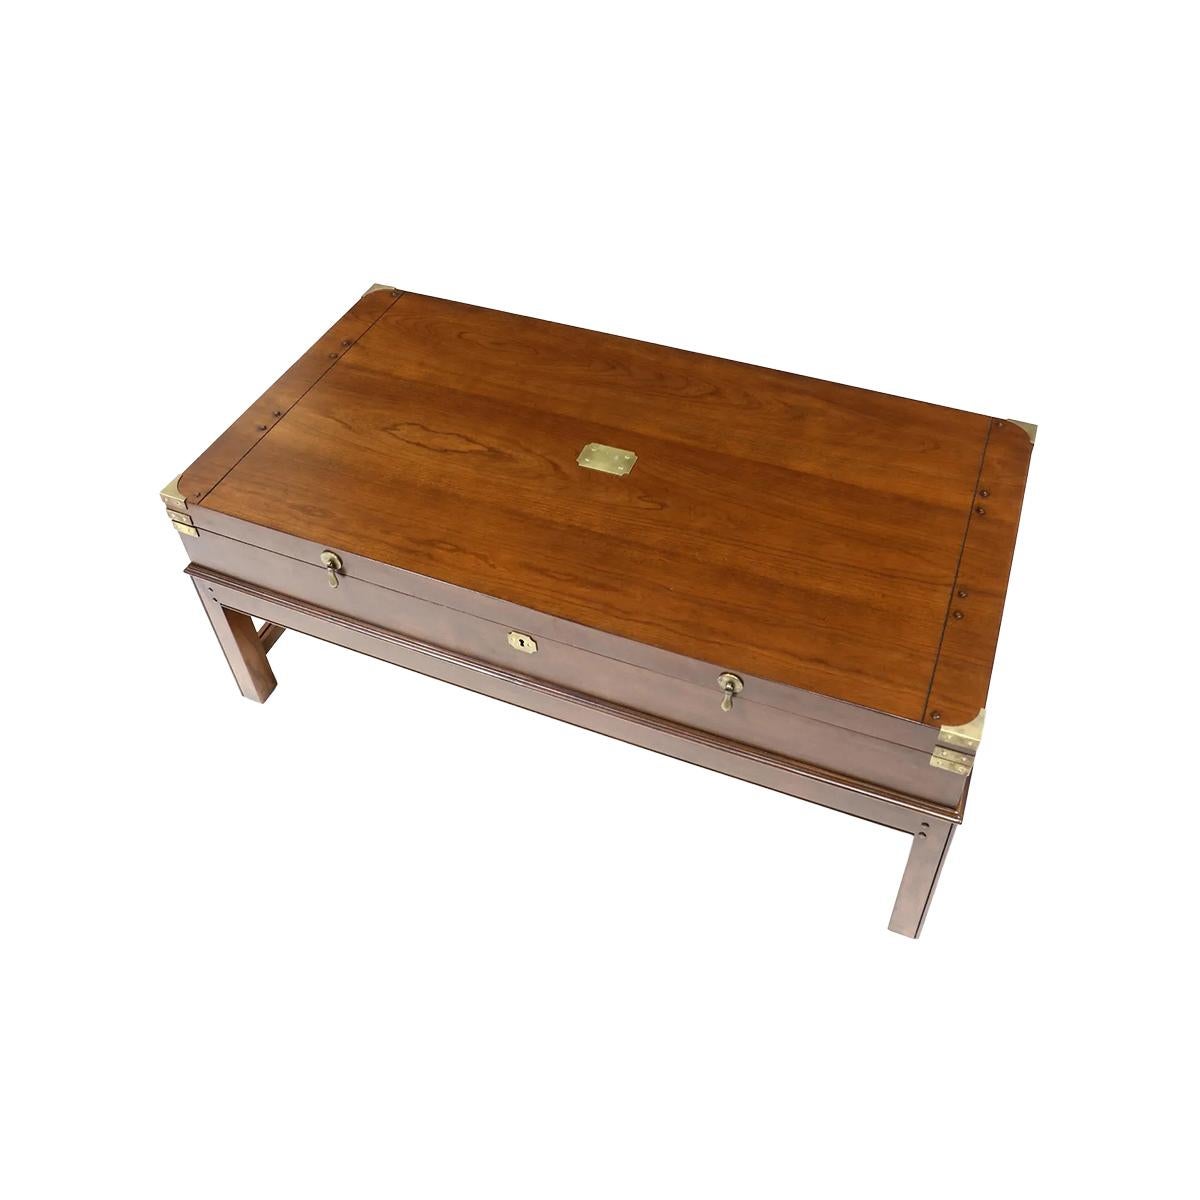 In the antique English Campaign style. The large lift-top wooden coffee table provides ample storage in a unique traditional style. With brass mounts and pulls. Raised on a Georgian style molded edge H form stretcher base. 

Dimensions: 48.75